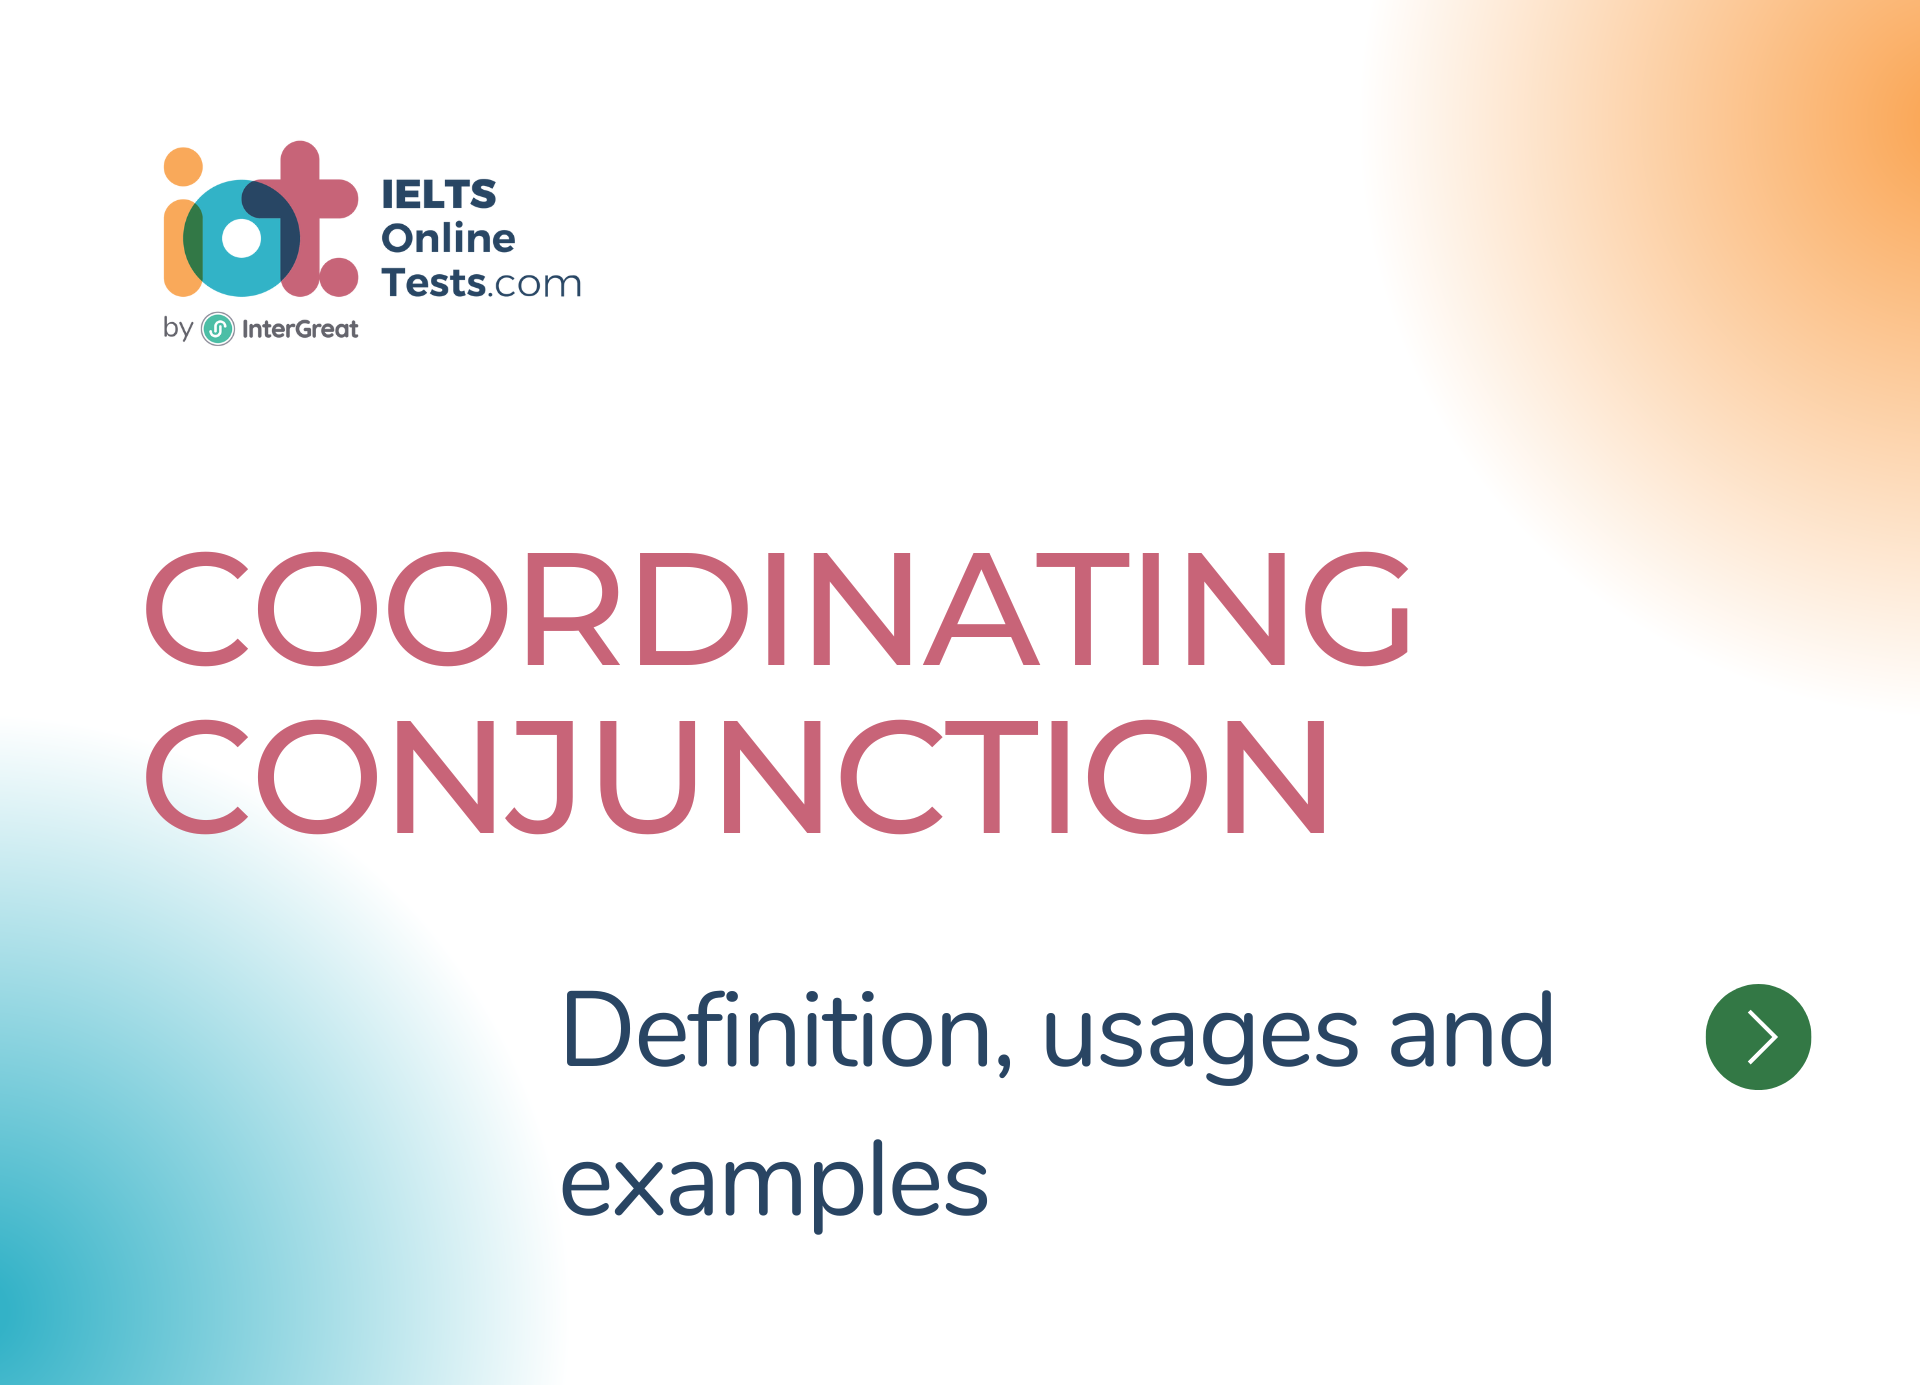 Coordinating conjunction definition, usages and examples